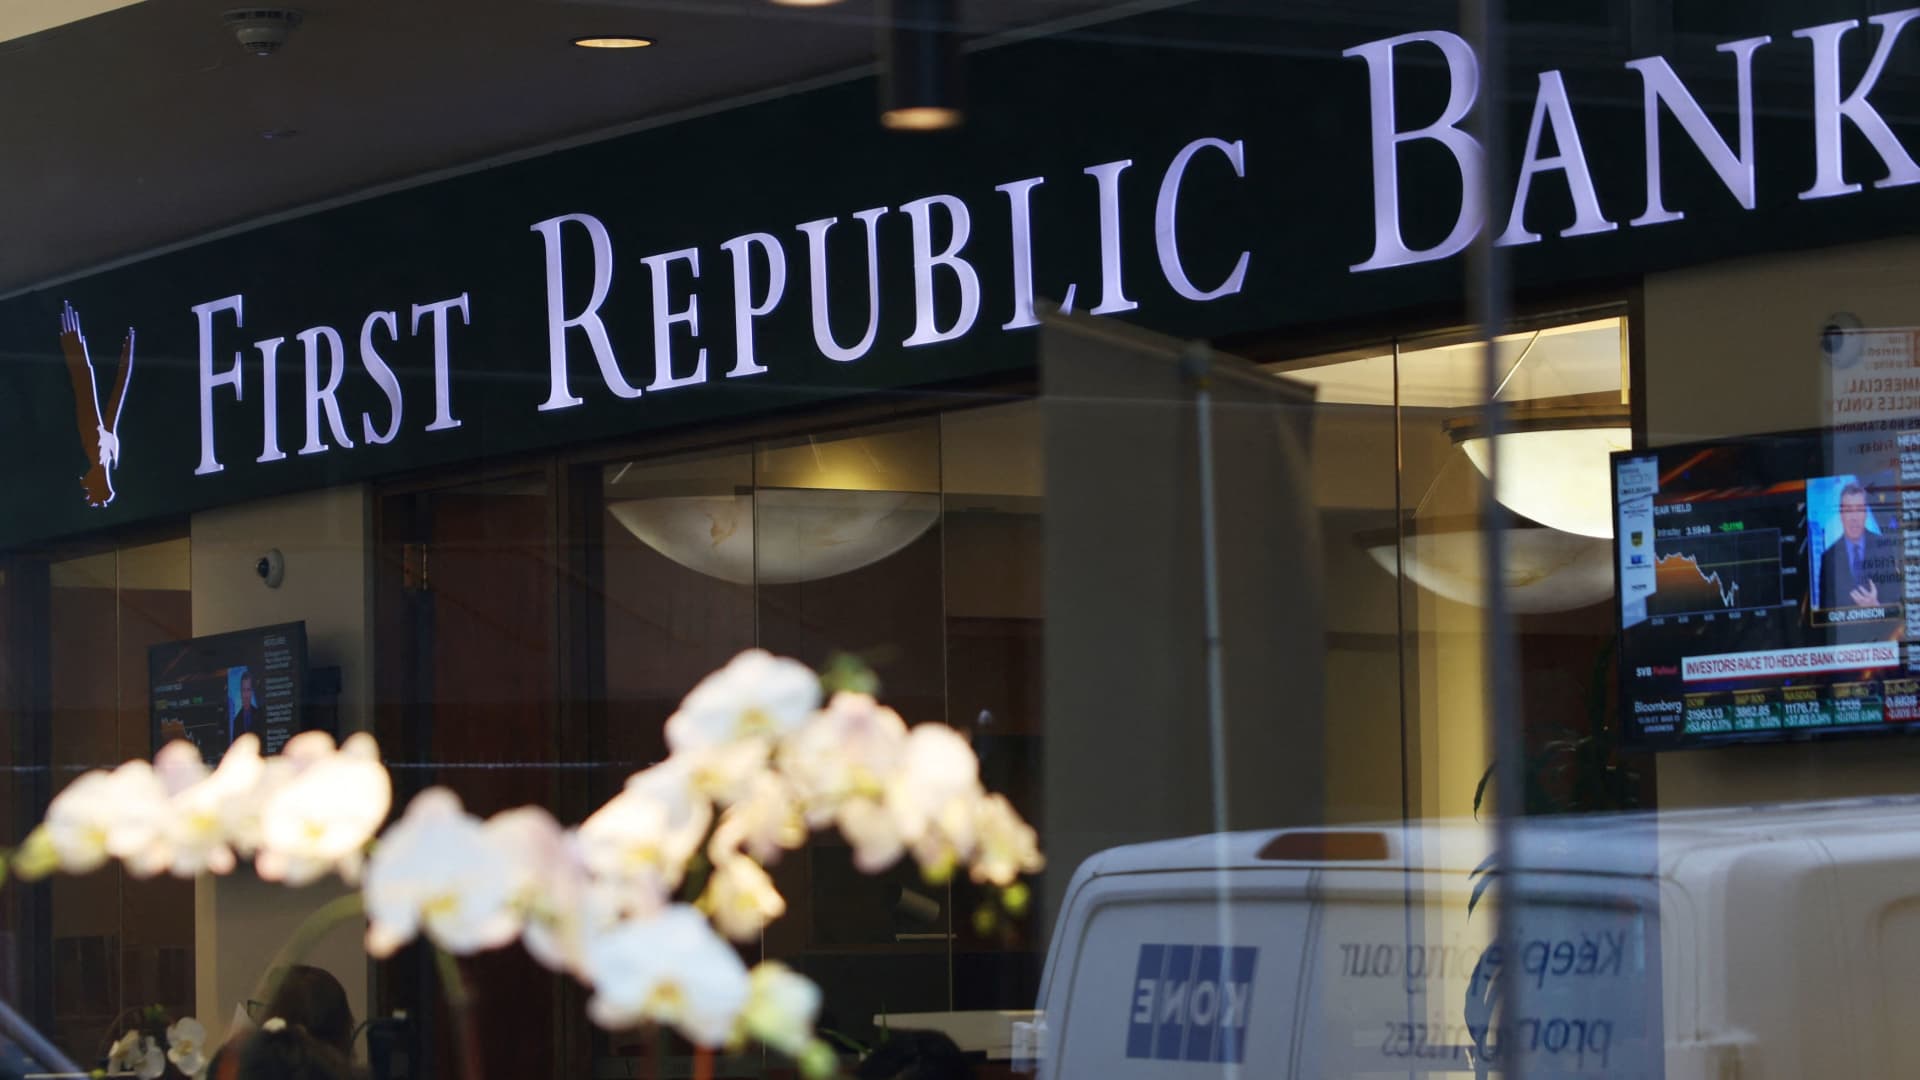 To start with Republic shares drop far more than 20% even with deposit infusion, dragging down other regional banks